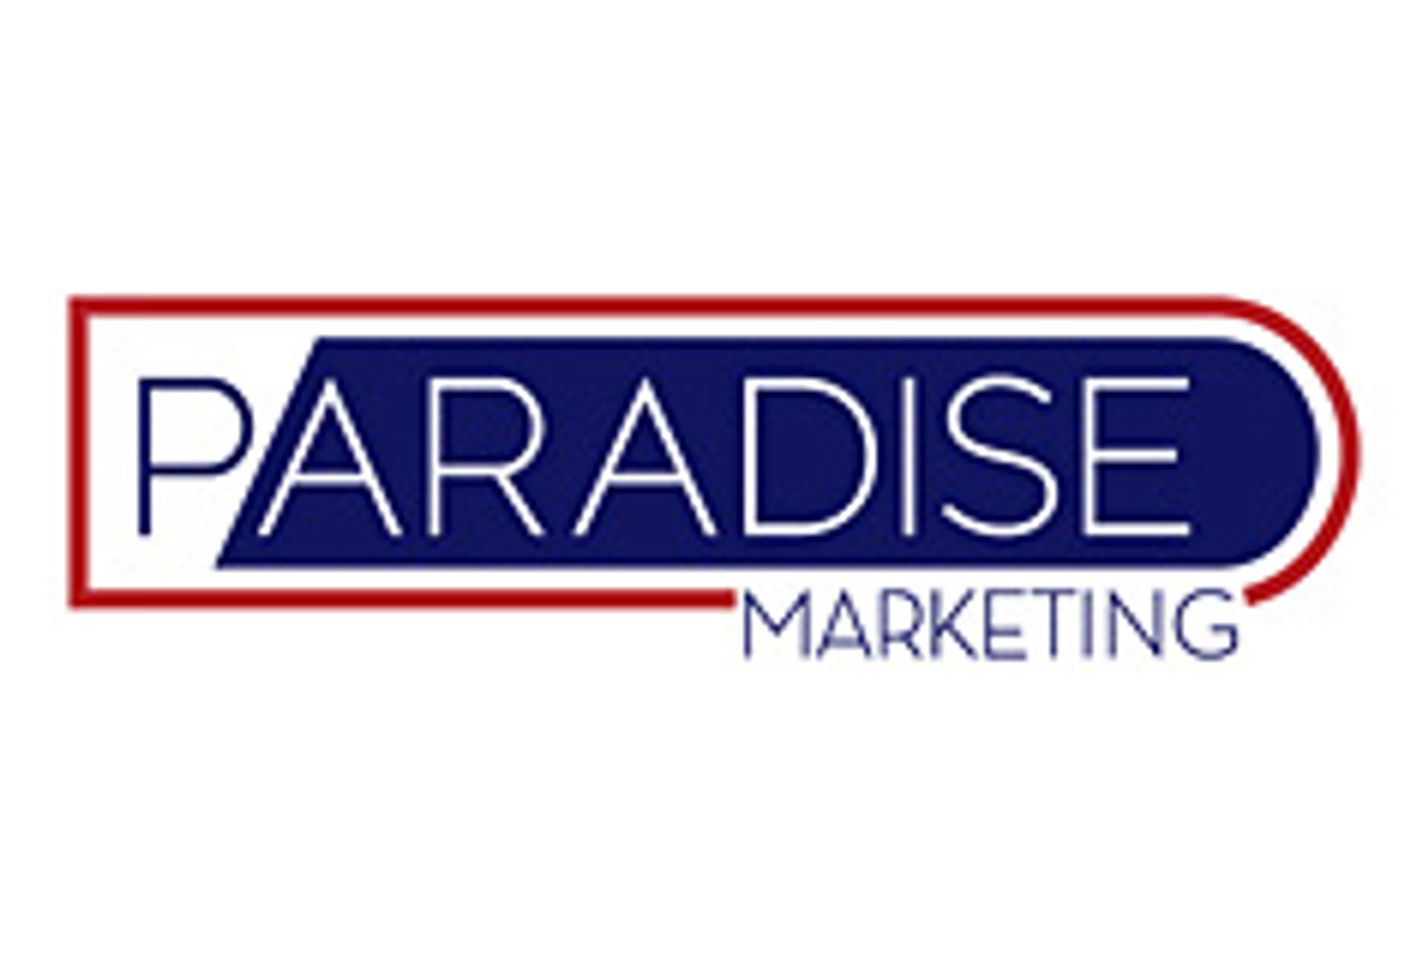 Paradise Marketing Product Brands Receive 3 Top 2013 AVN Award Nominations